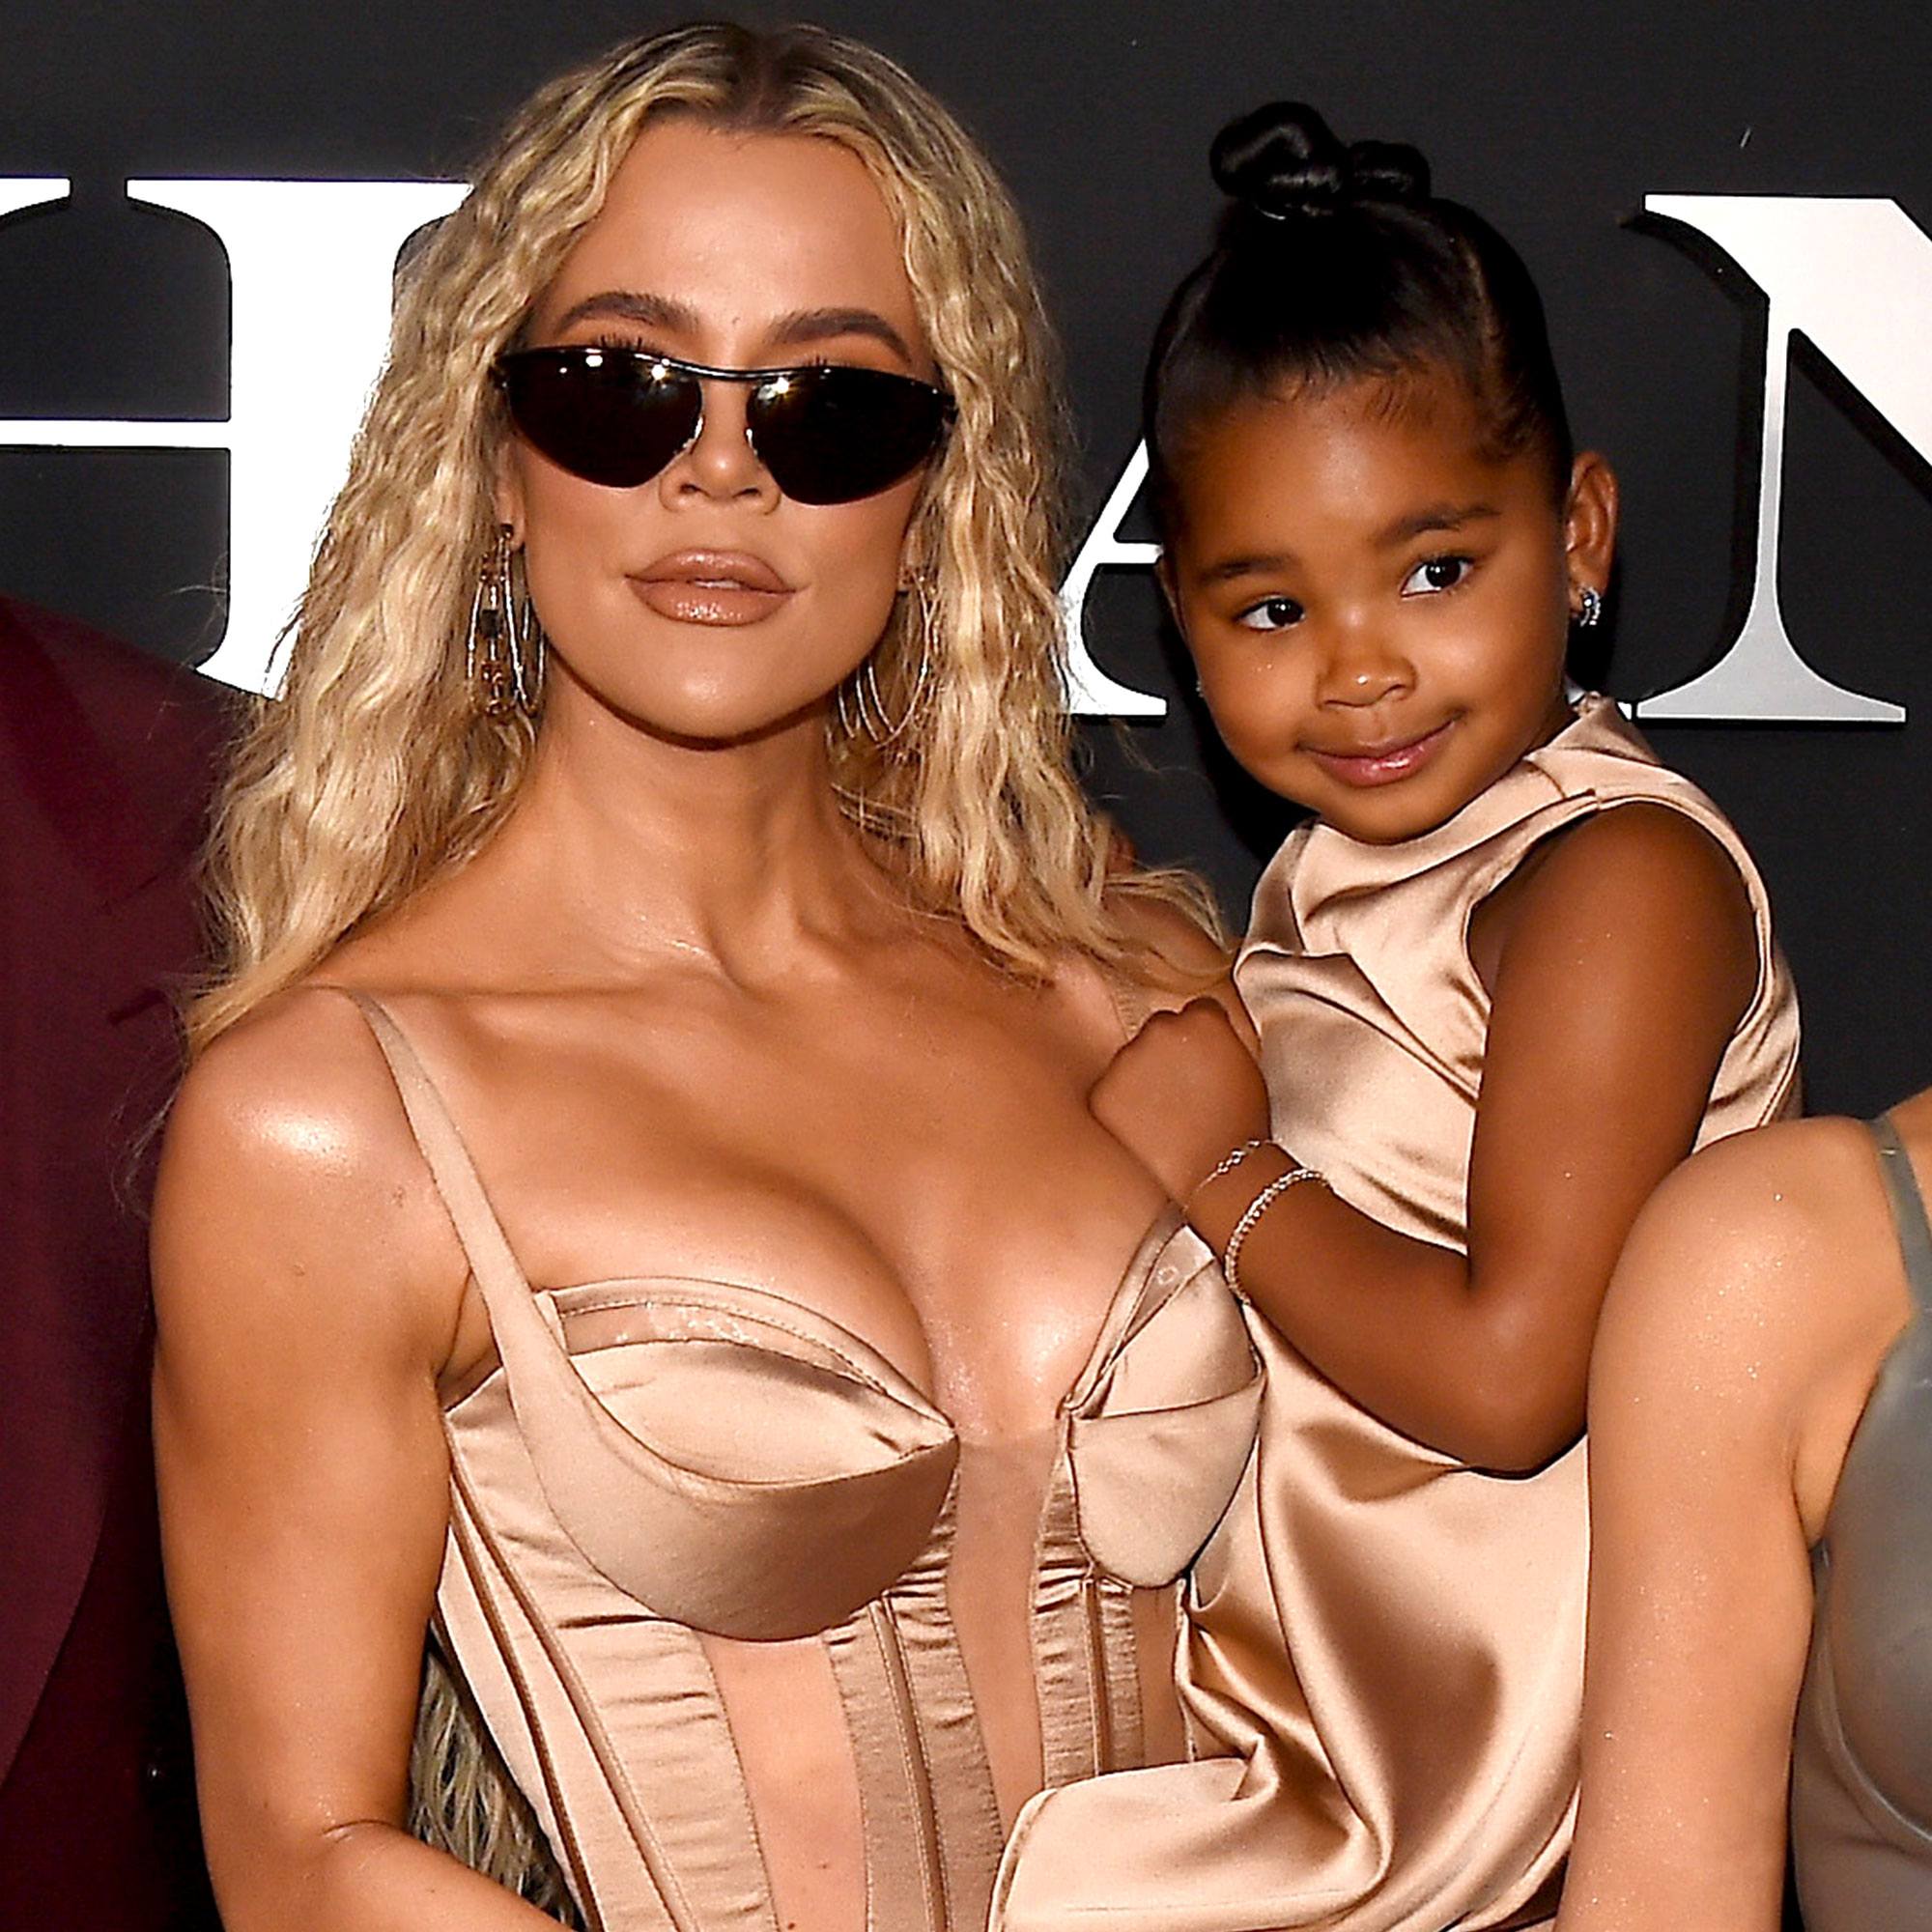 Did Khloé Kardashian or True Thompson have the best outfit this week?